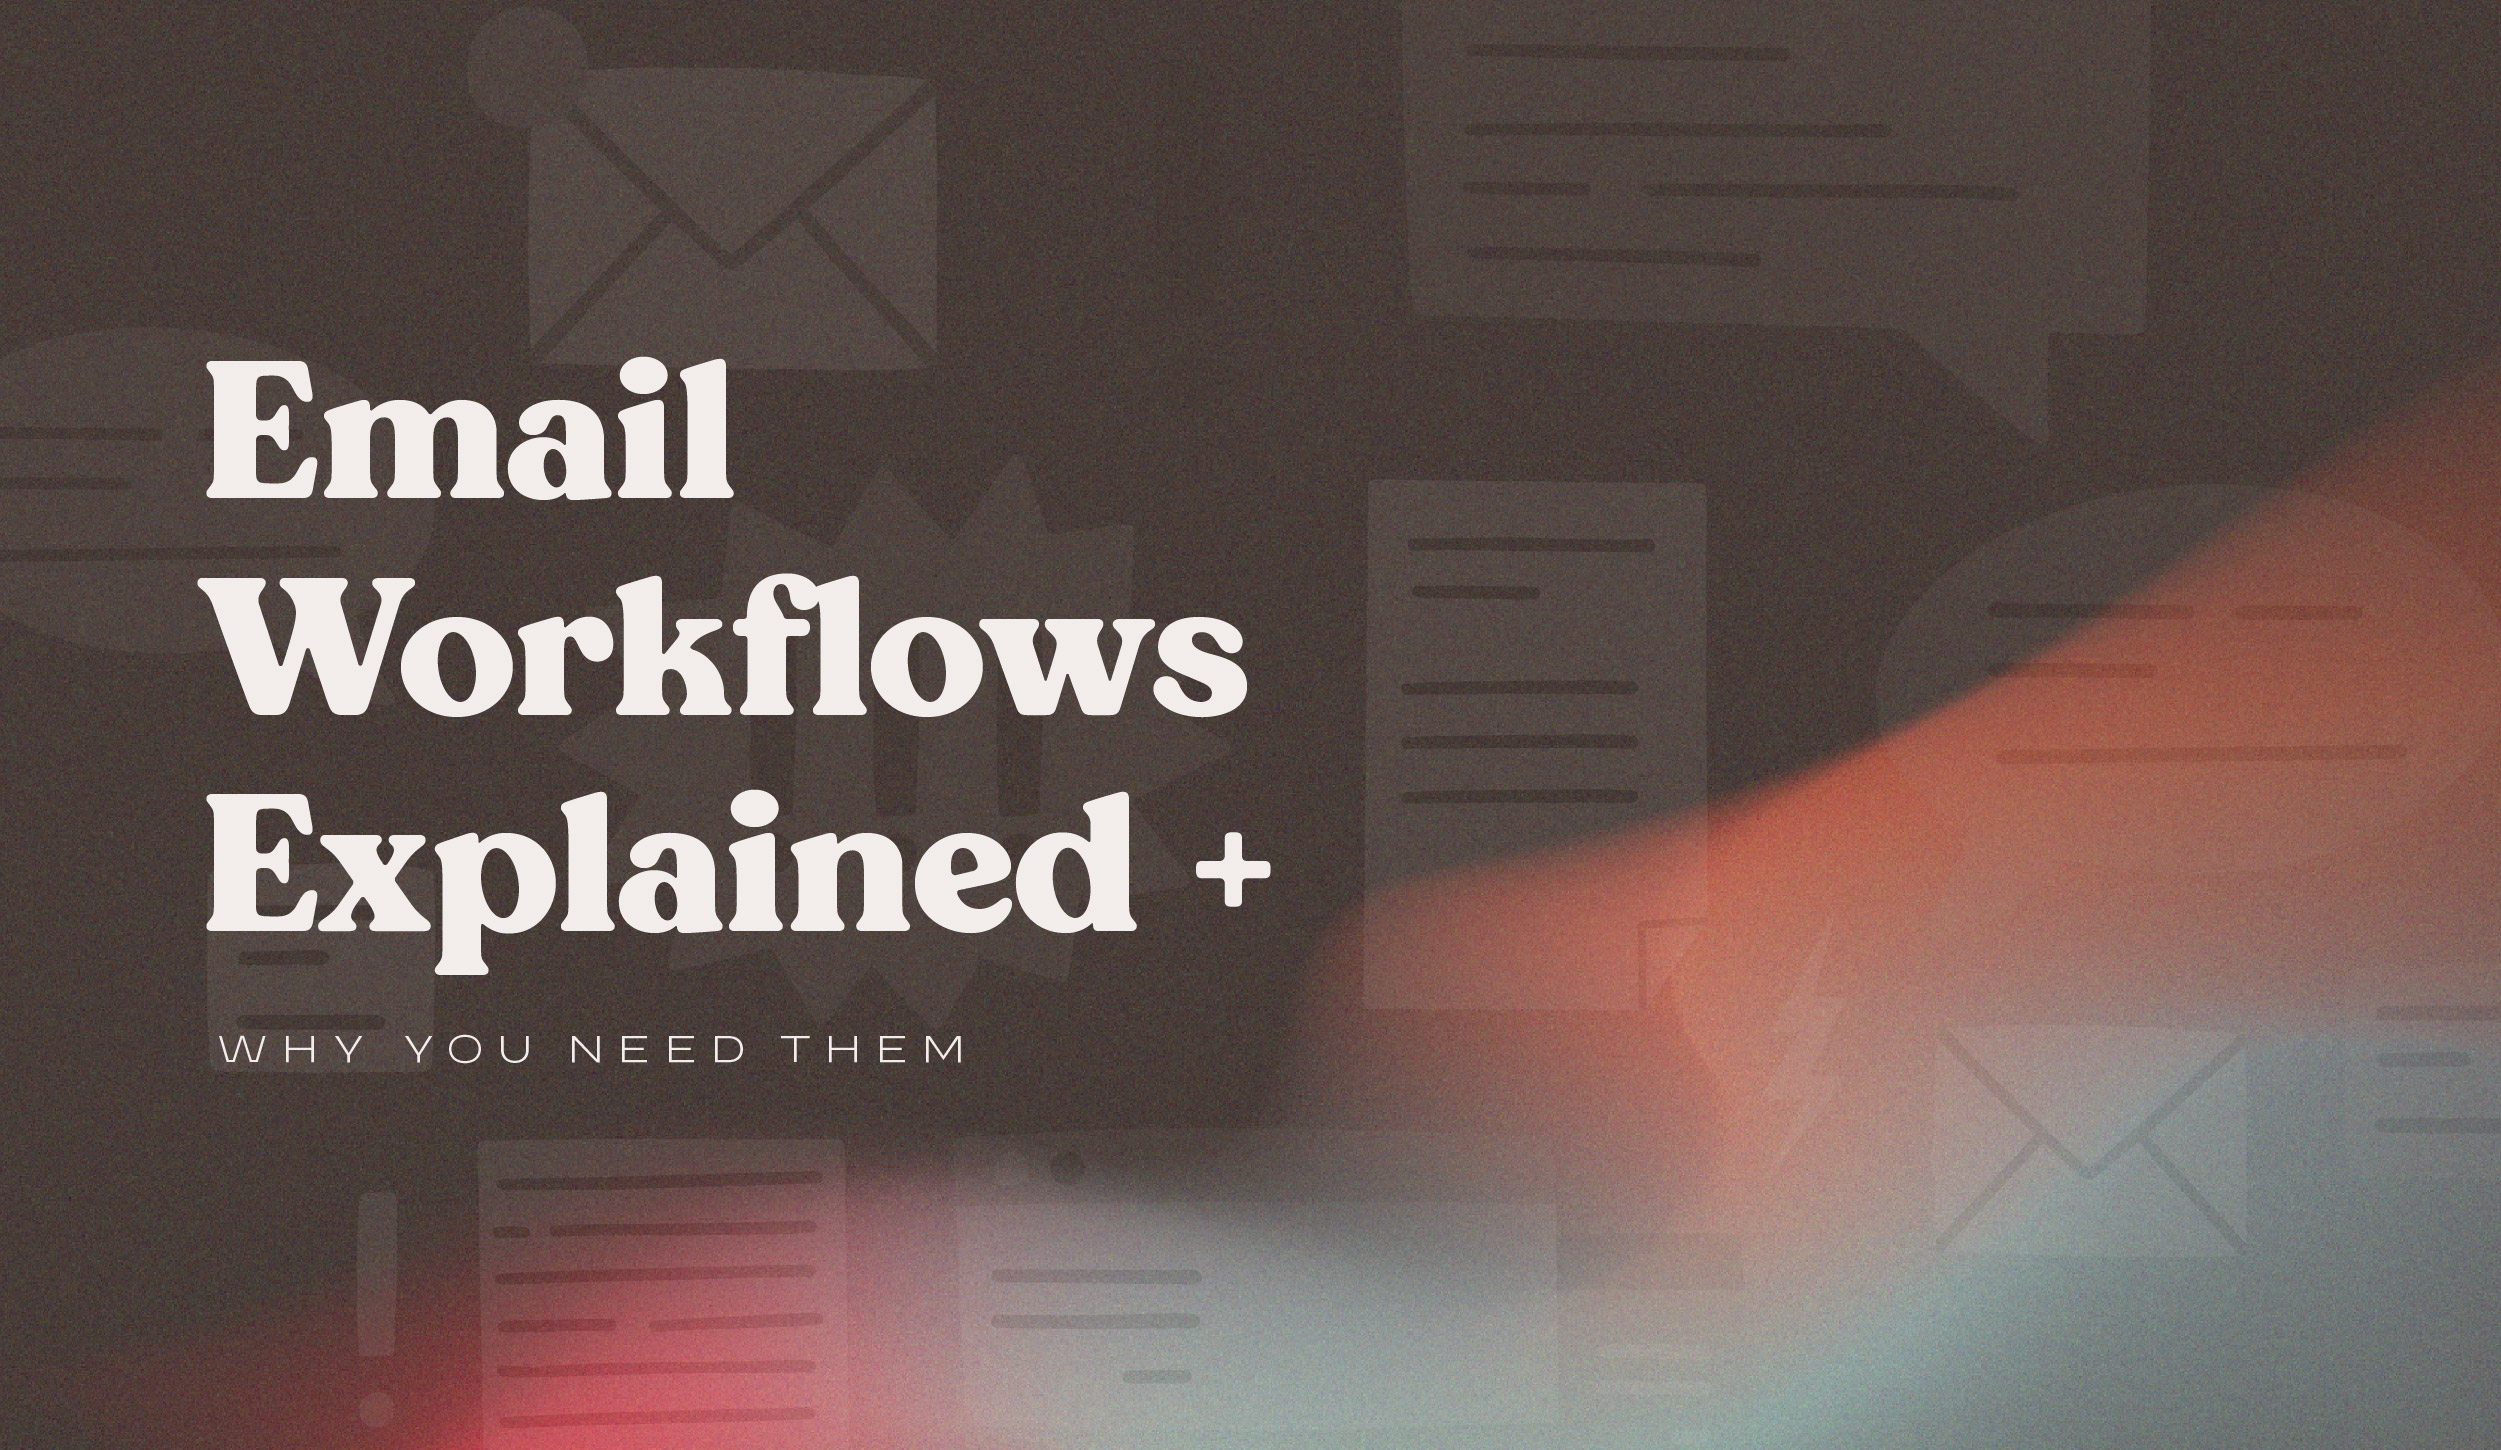 Email Workflows Explained + Why You Need Them